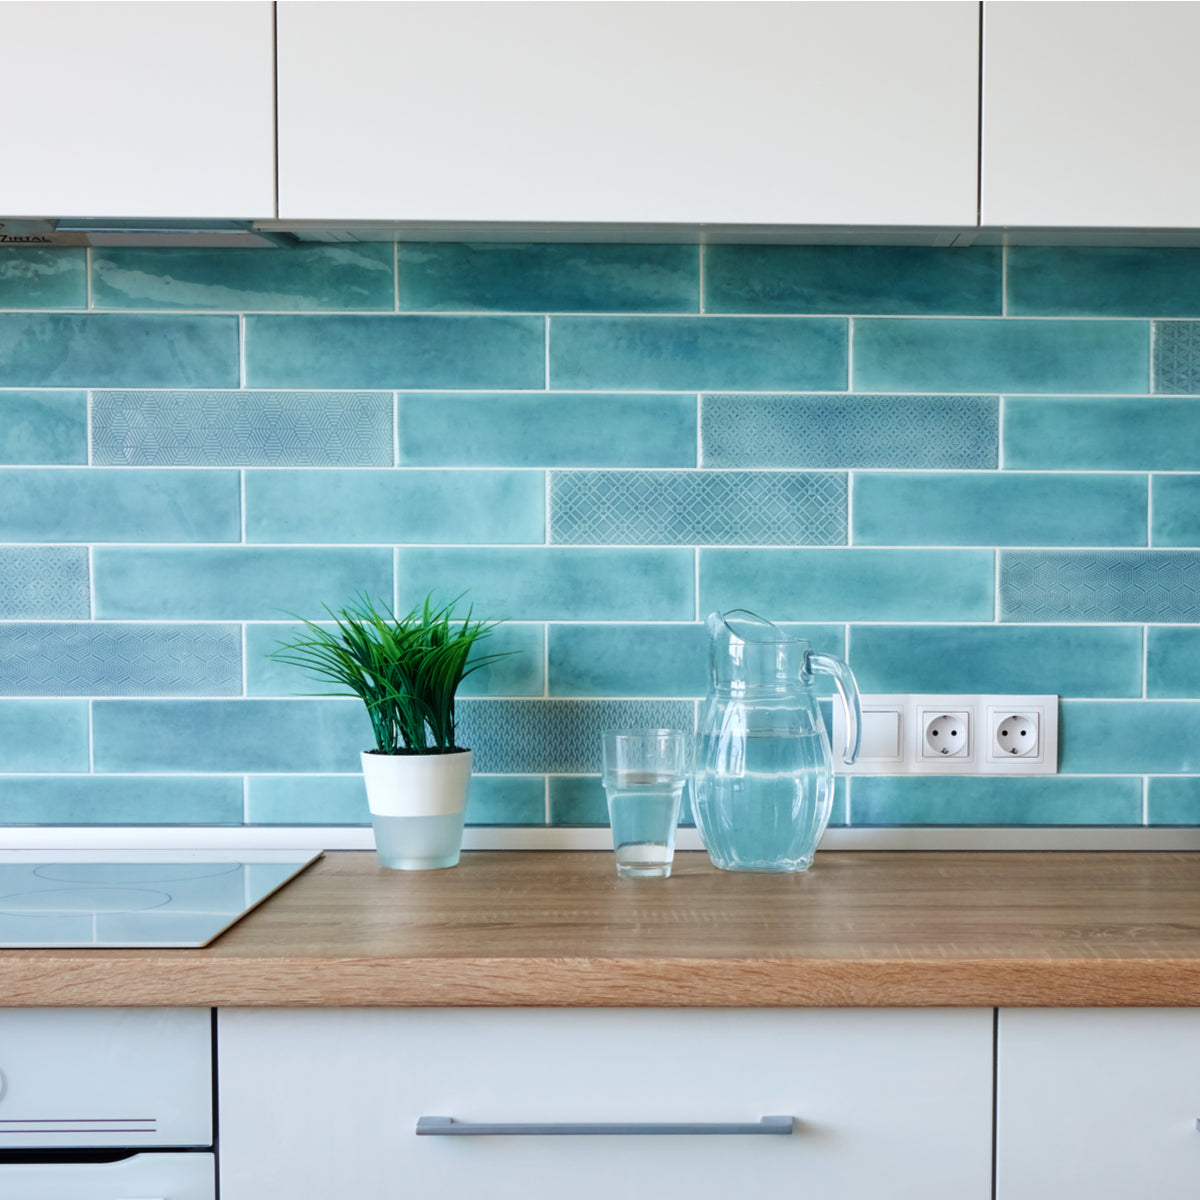 How to Choose A Countertop and Backsplash